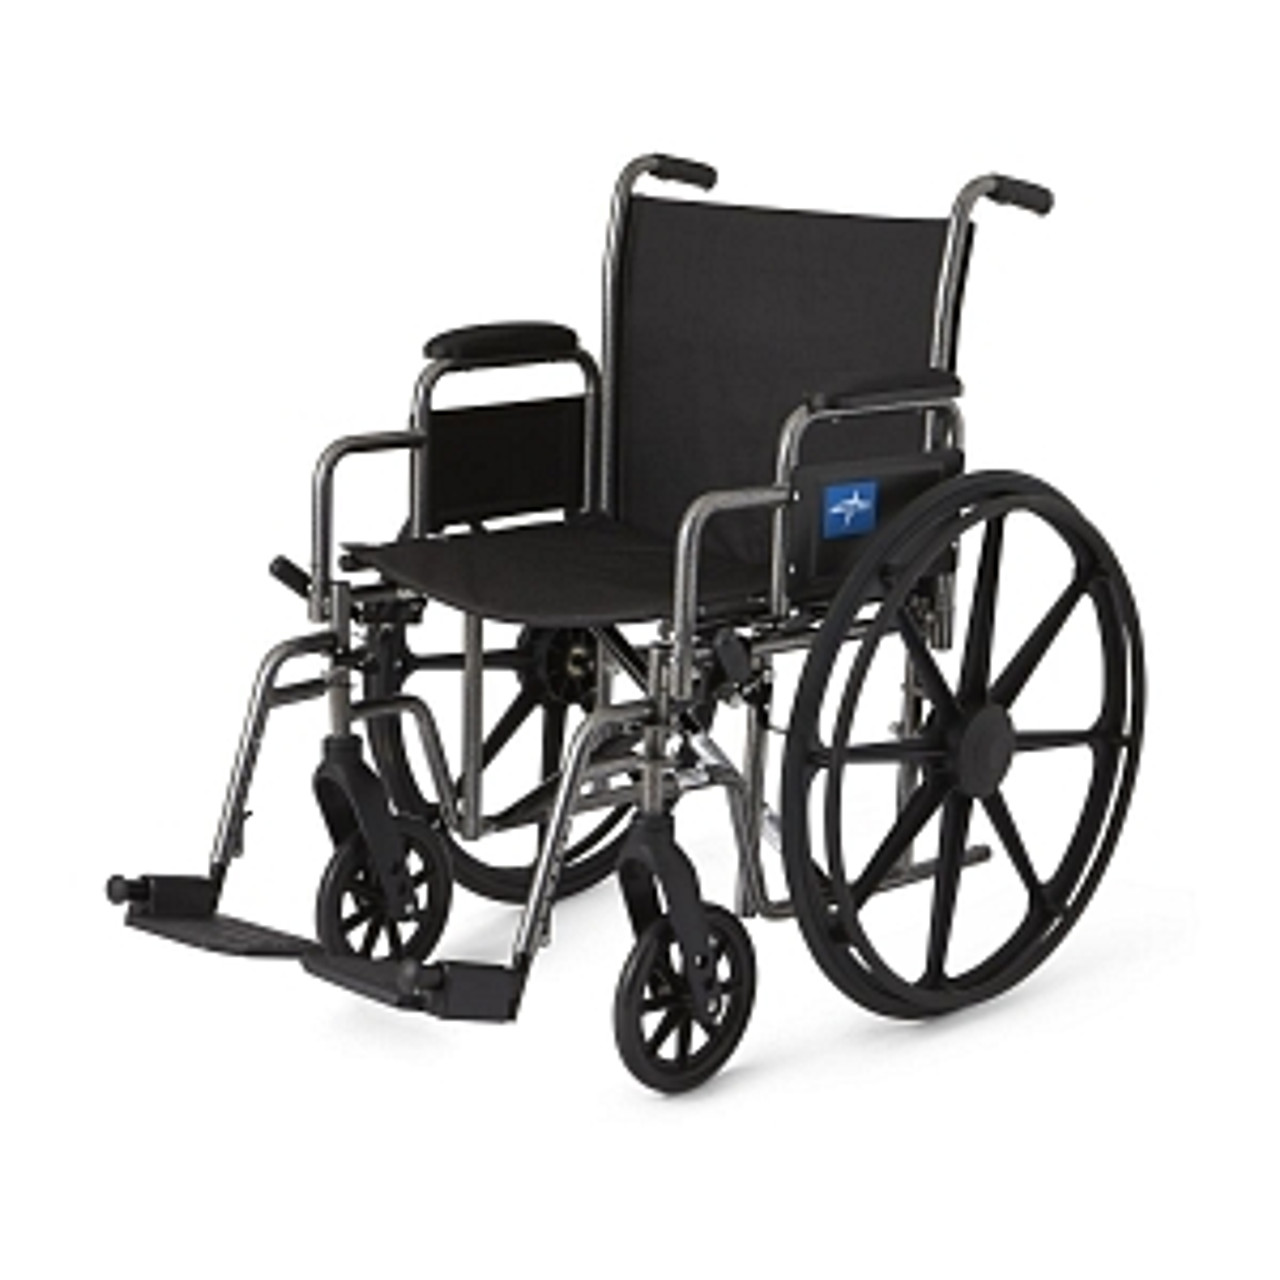 Durable tig-welded frame in gray powder coat finish
Features comfortable nylon upholstery, smooth-rolling, solid flat-free tires and dual axle hemi-height adjustable
Seat size 20" x 16" (51 cm x 41 cm)
300 lb. (136 kg) weight capacity
This product contains dry natural rubber